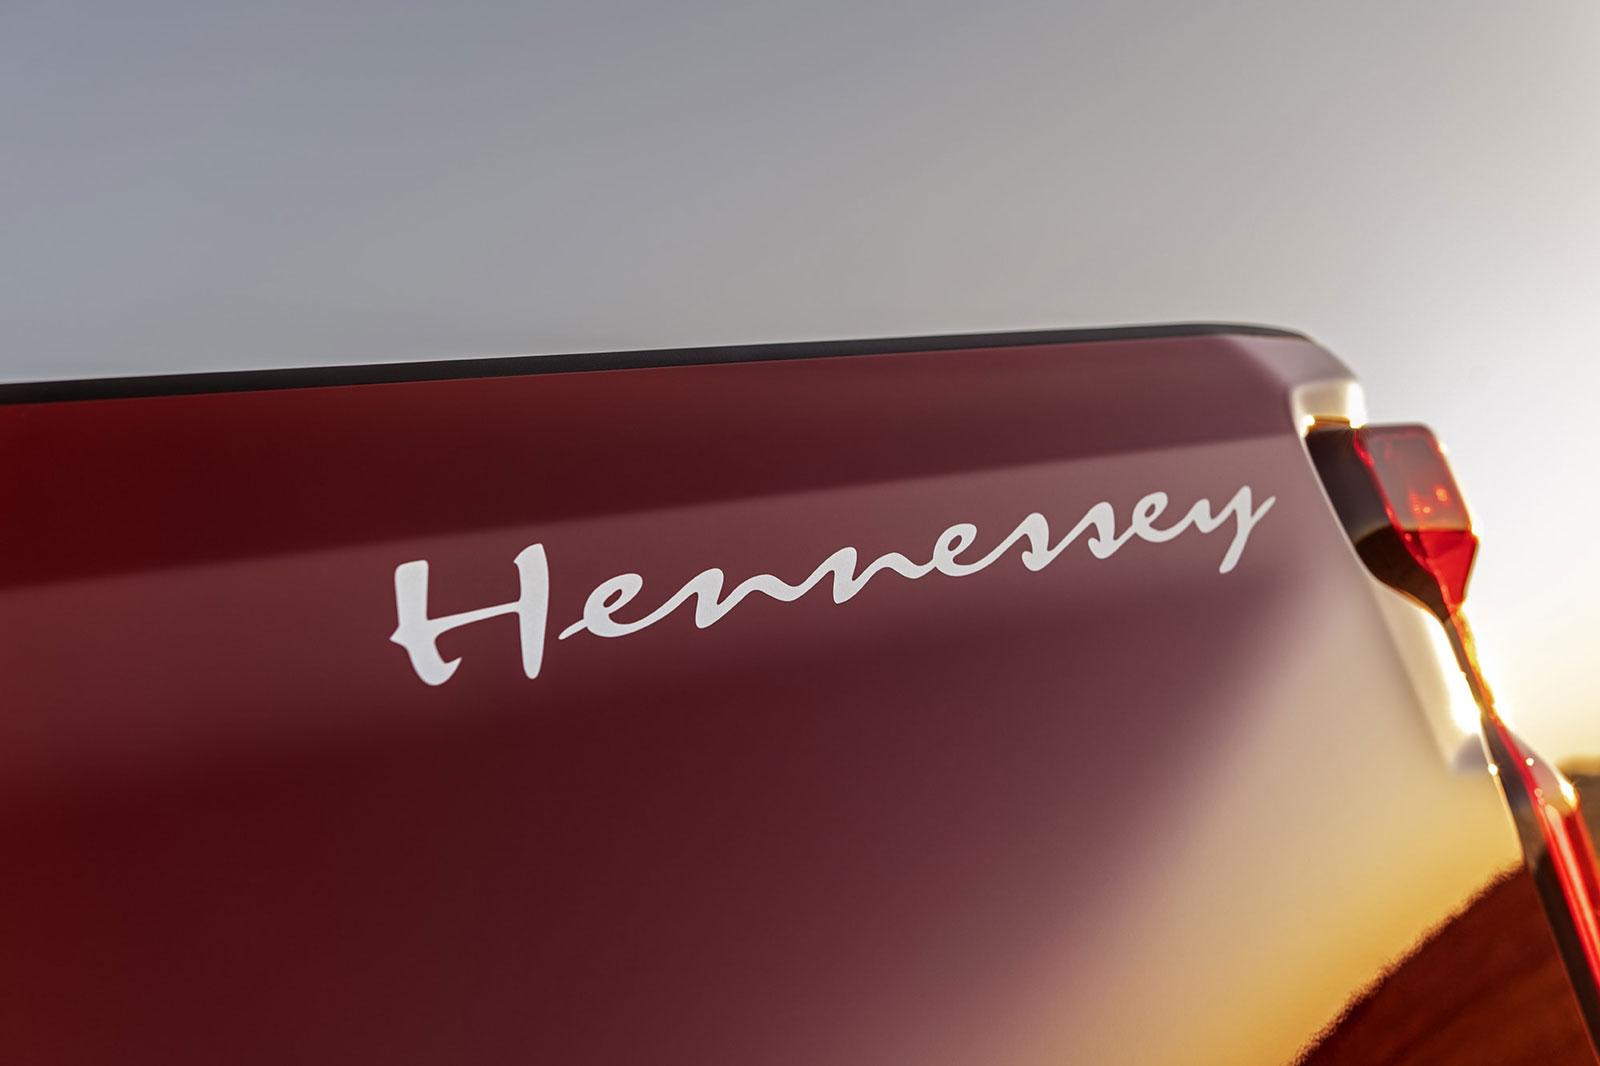 White Hennessey graphic on exterior of a supercharged red Chevy Silverado